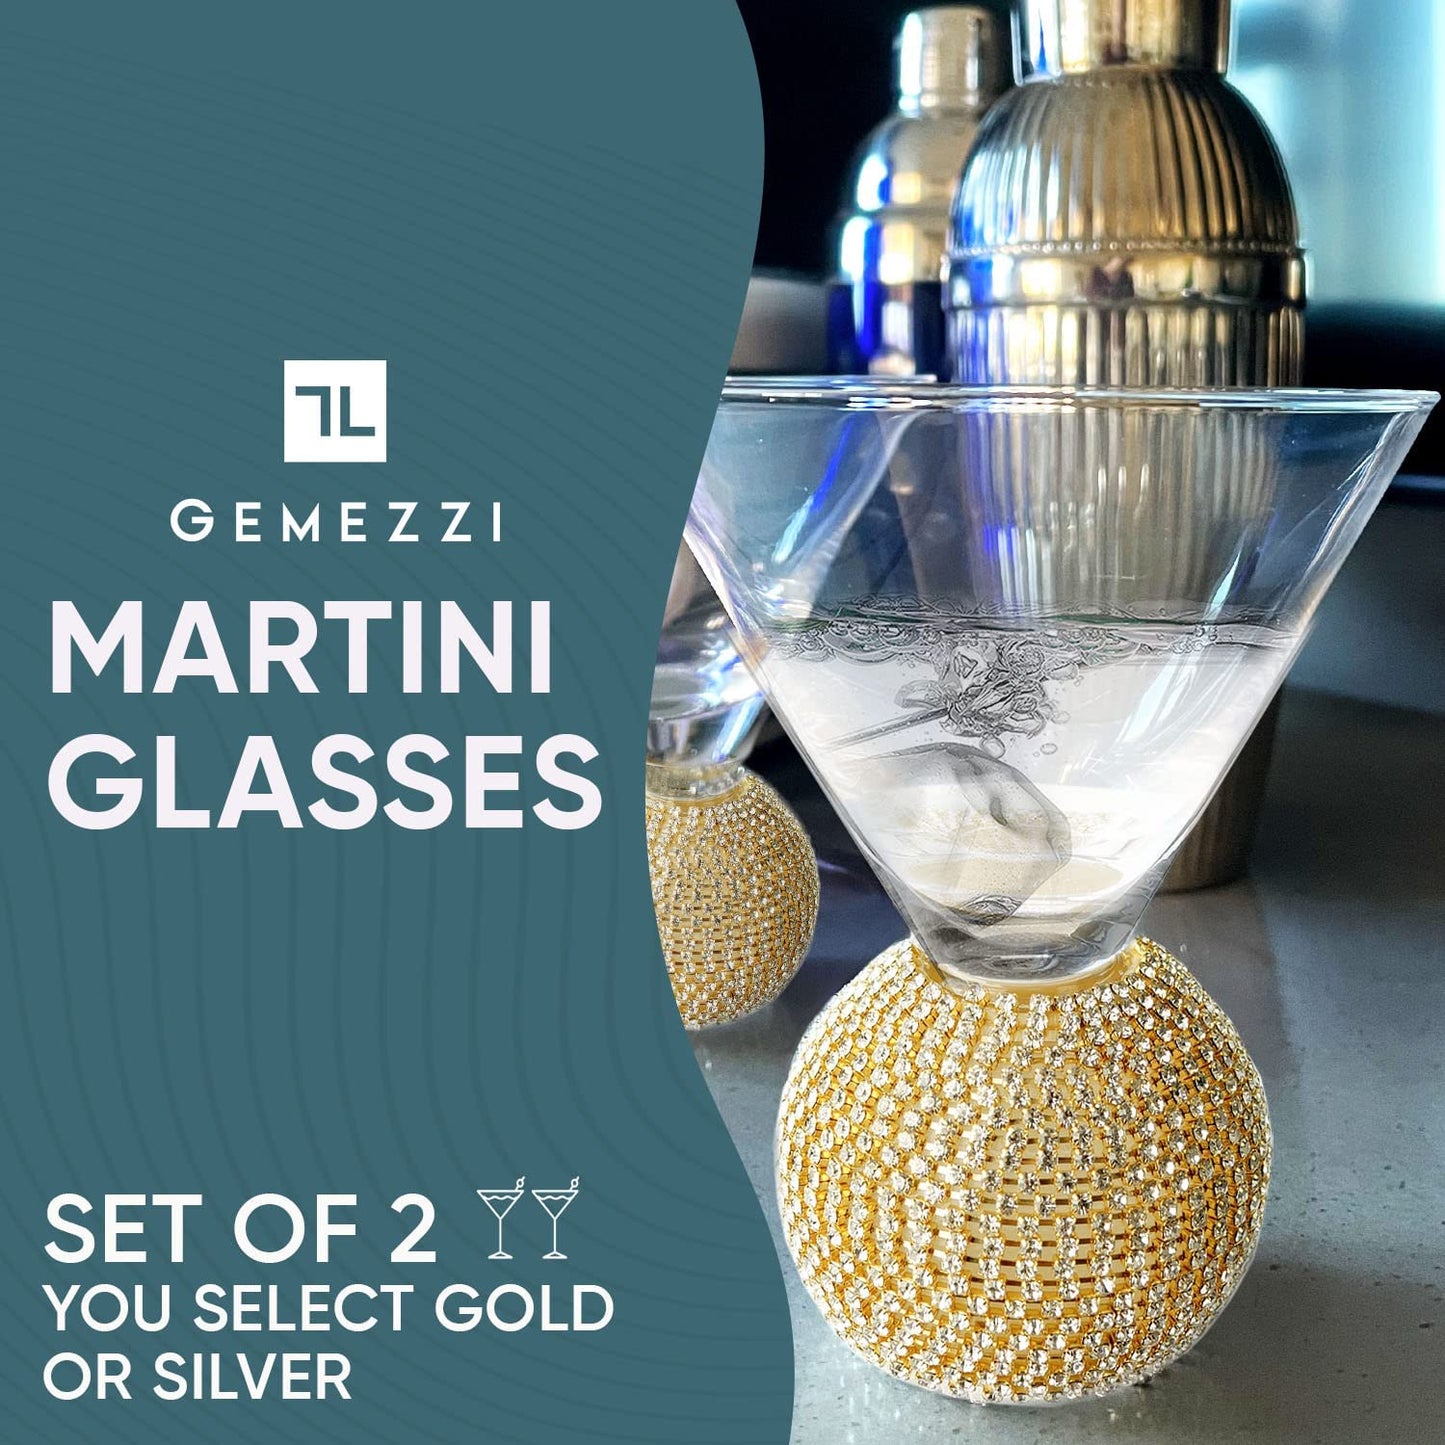 Gemezzi Stemless Martini Glasses Set of 2, Gold Stemless Cocktail Glass, Crystal Ball Base in Elegant Box, Perfect Bar Accessories for Margarita, Manhattan, Cosmos, Mixed Drinks, and Desserts